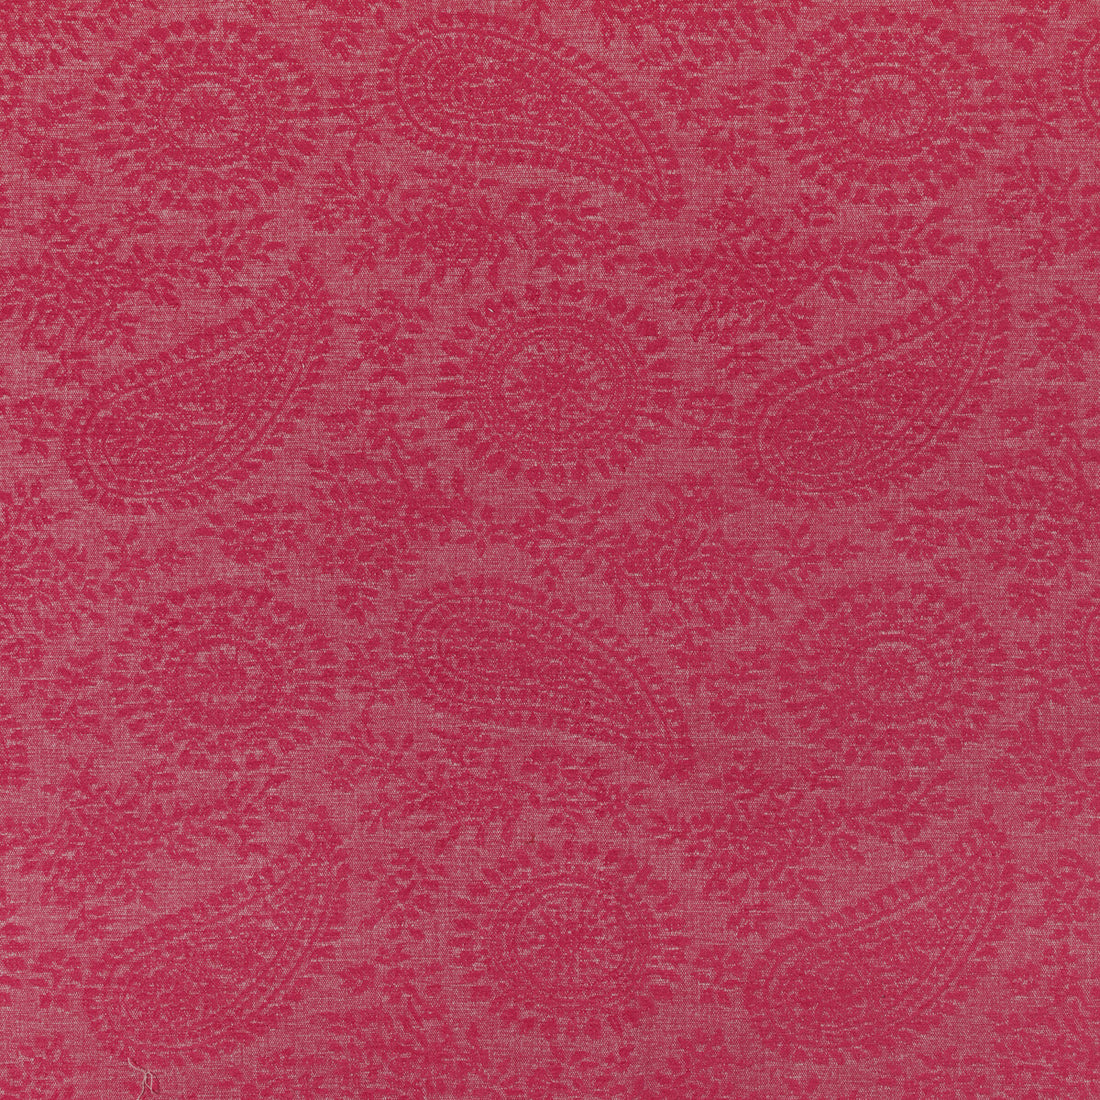 Wylder fabric in blossom color - pattern 36269.19.0 - by Kravet Contract in the Gis Crypton collection